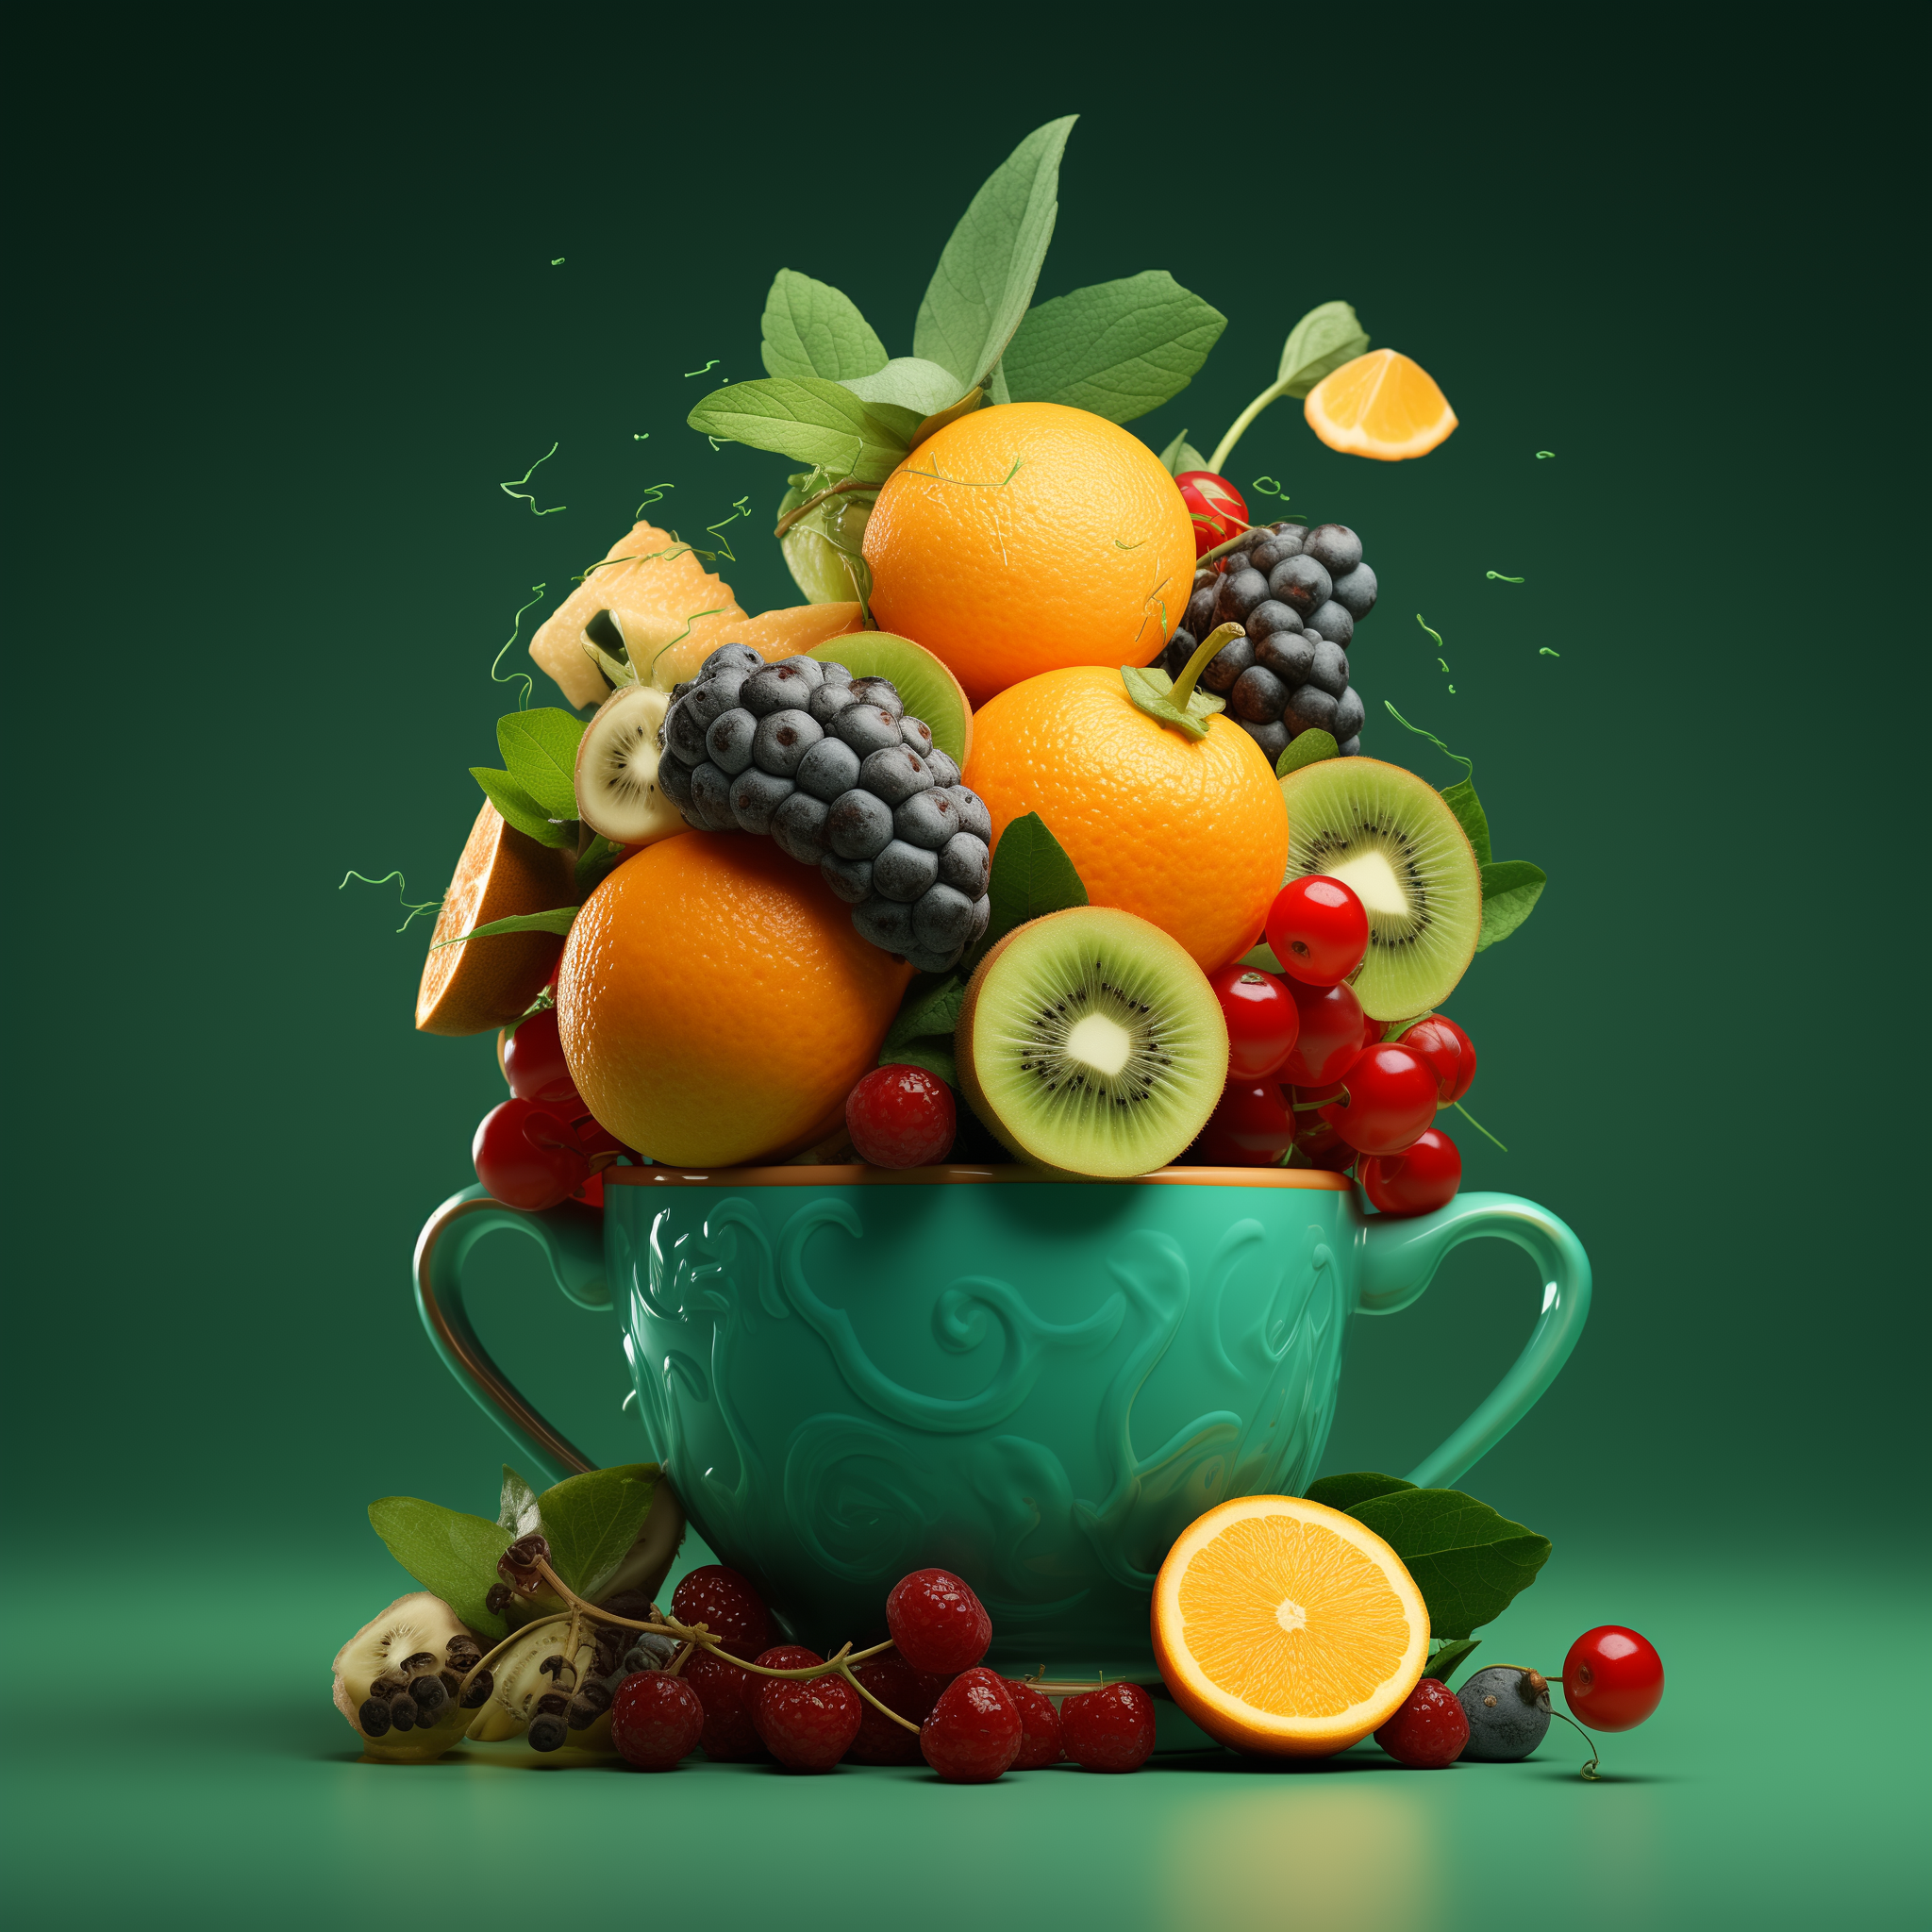 An intricately designed teal cup filled with an assortment of fresh fruits. Visible fruits include whole oranges, kiwi slices, blackberries, and clusters of red currants. There are hints of zest and mint leaves interspersed among the fruits, suggesting freshness and flavor, against a dark green background.